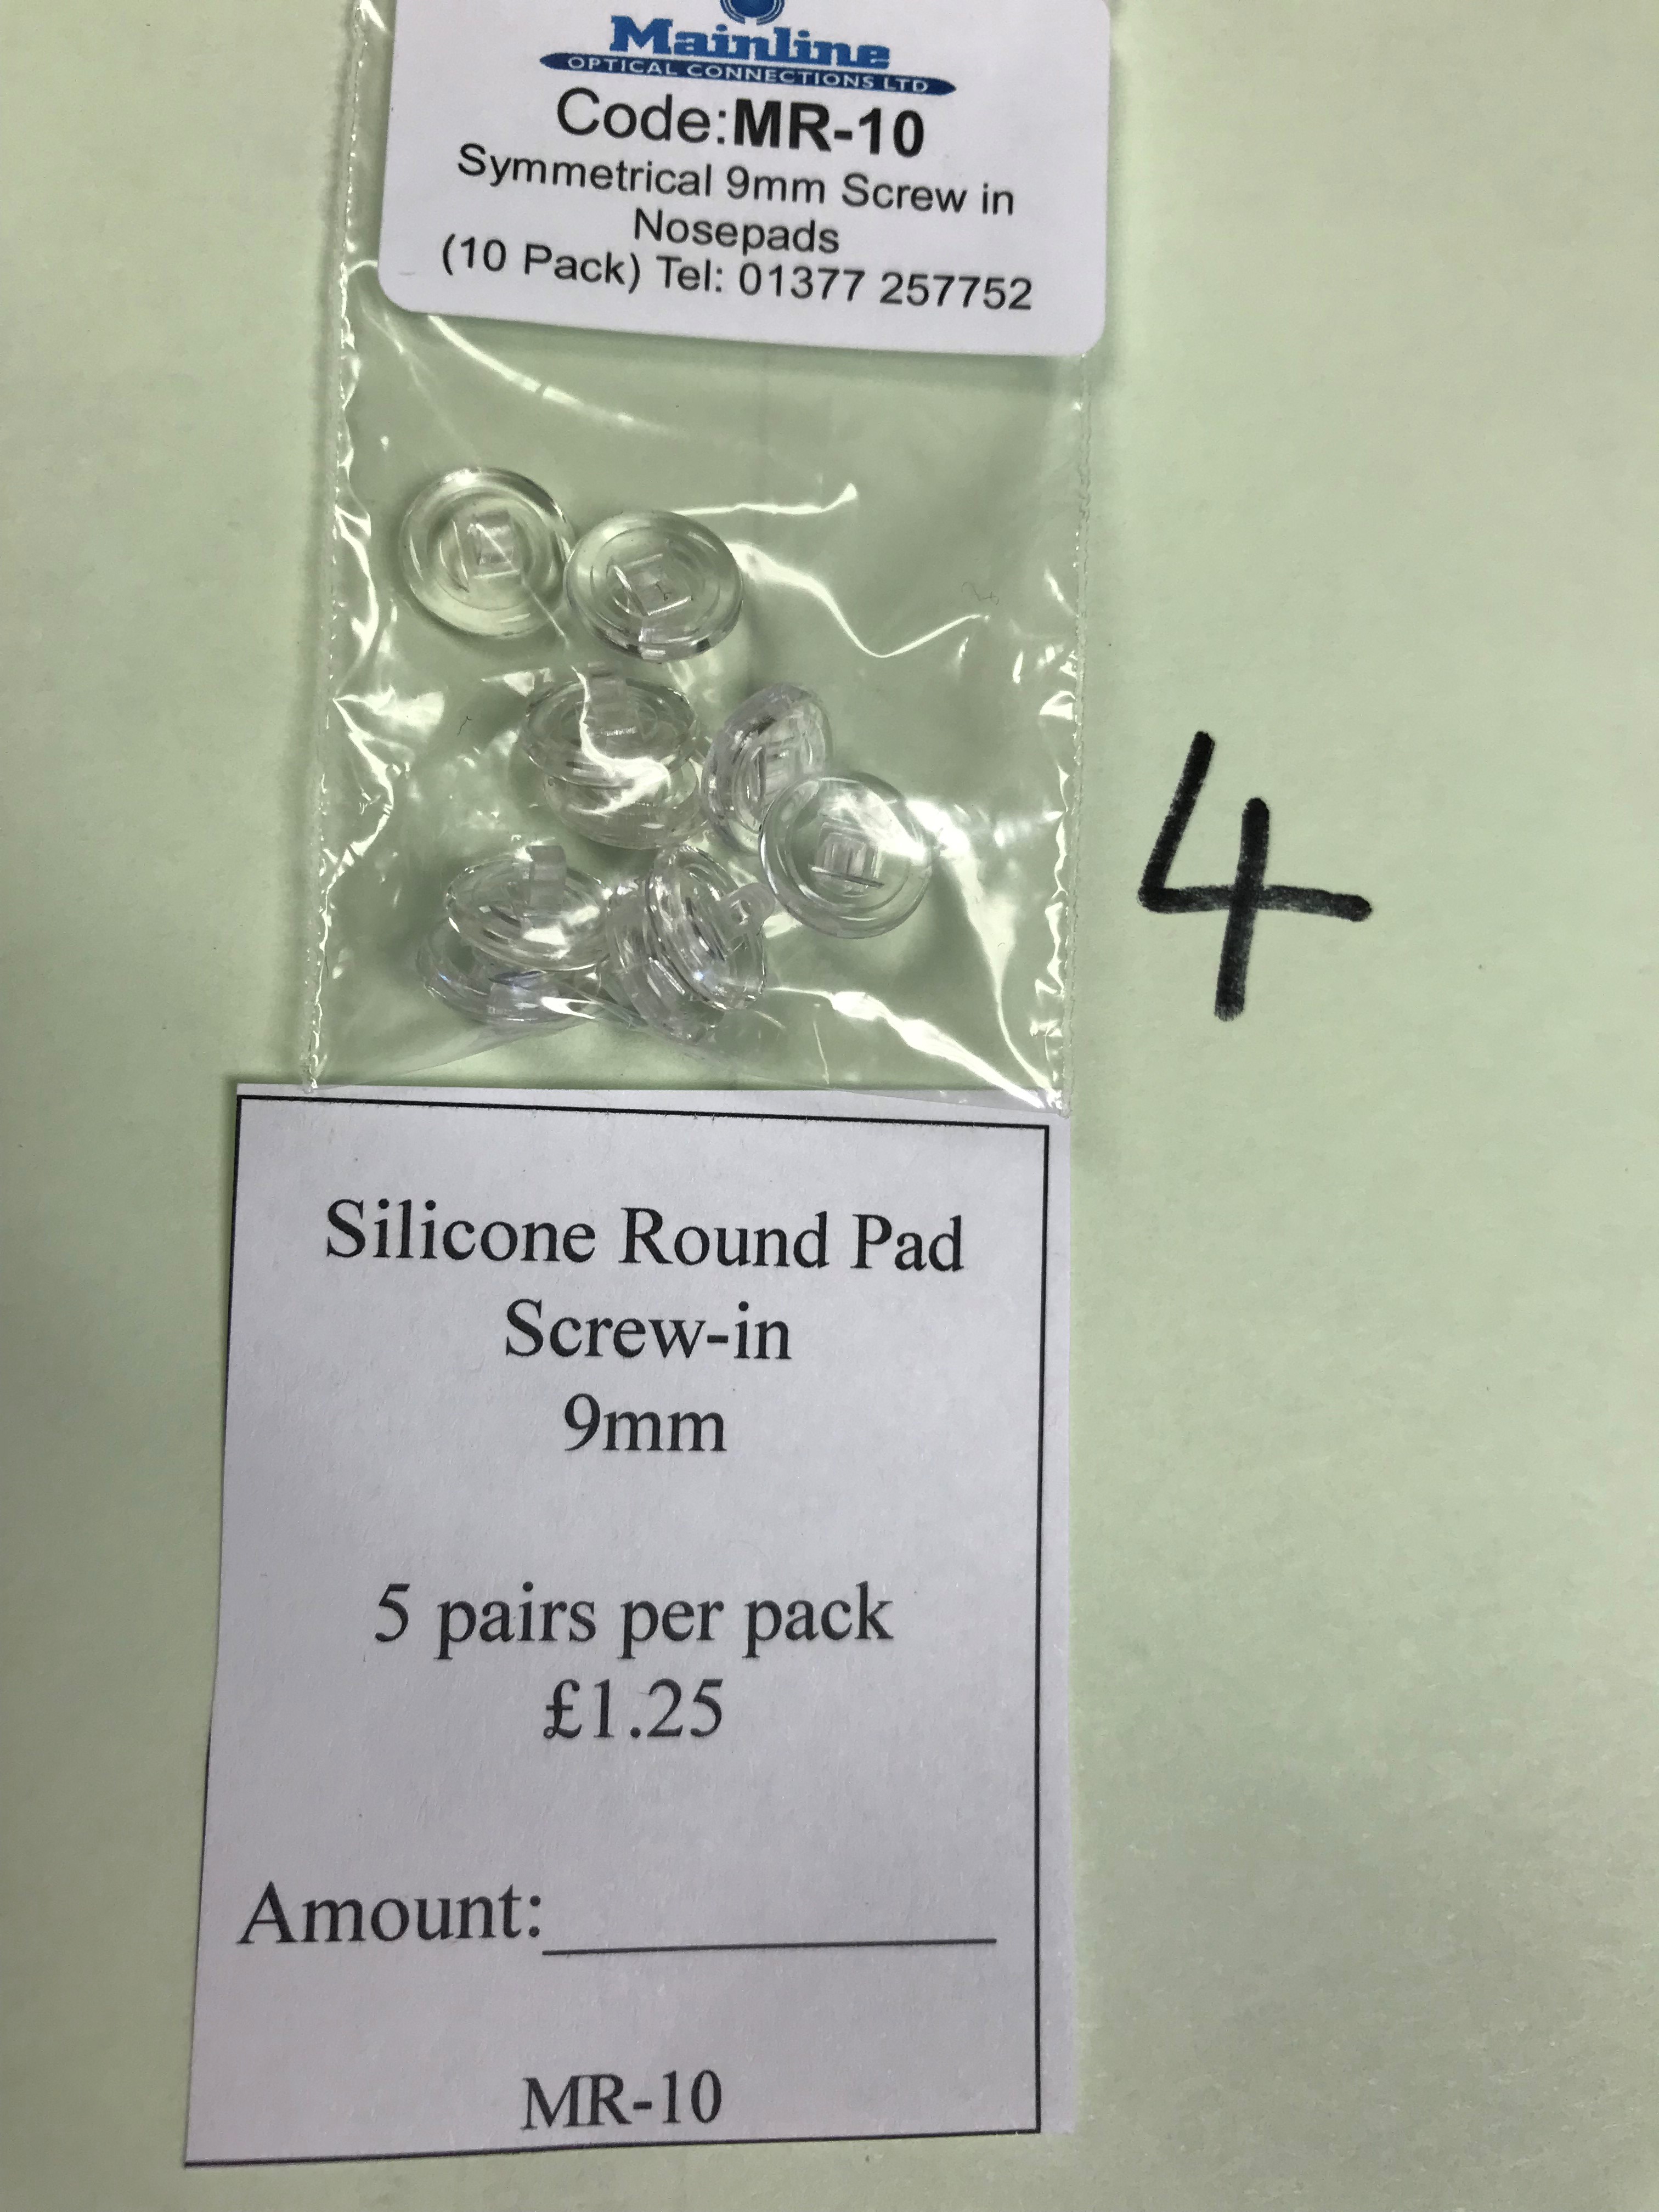 SILICONE ROUND PAD SCREW IN 9mm No. 4